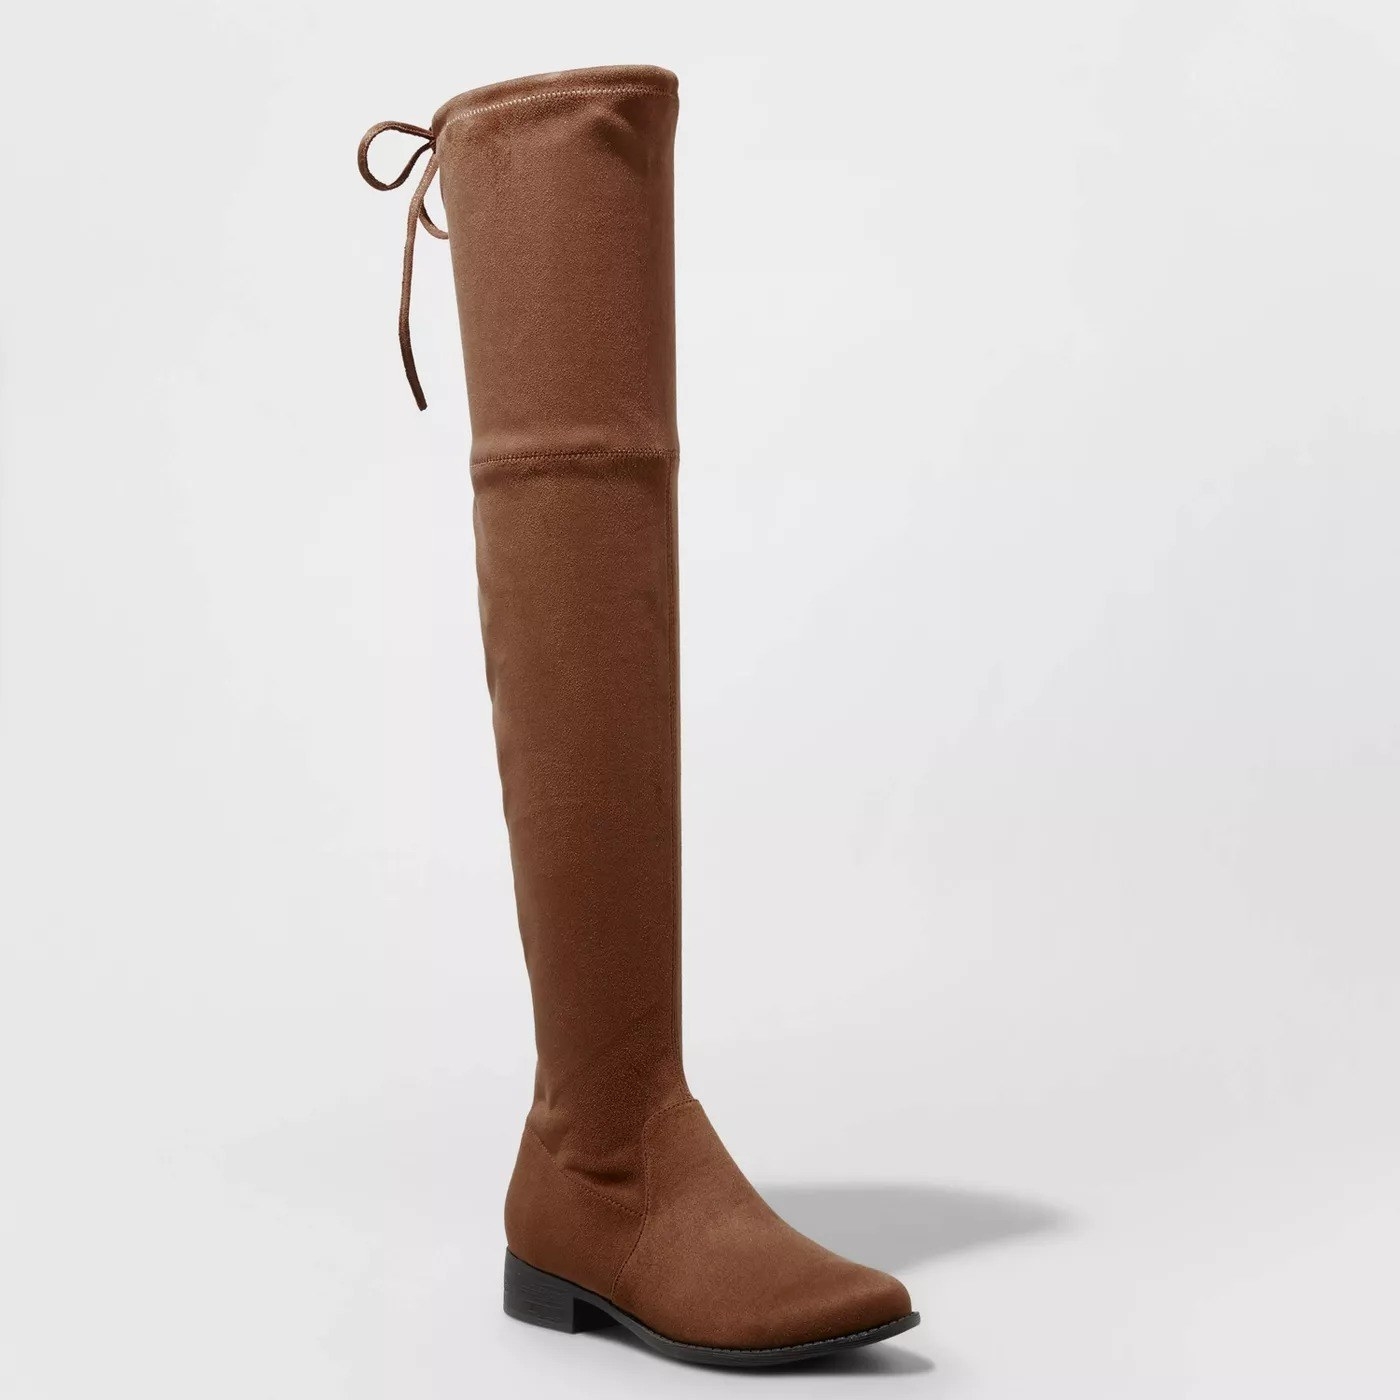 brown colored boots with black sole, tie string detail at the top of the boot